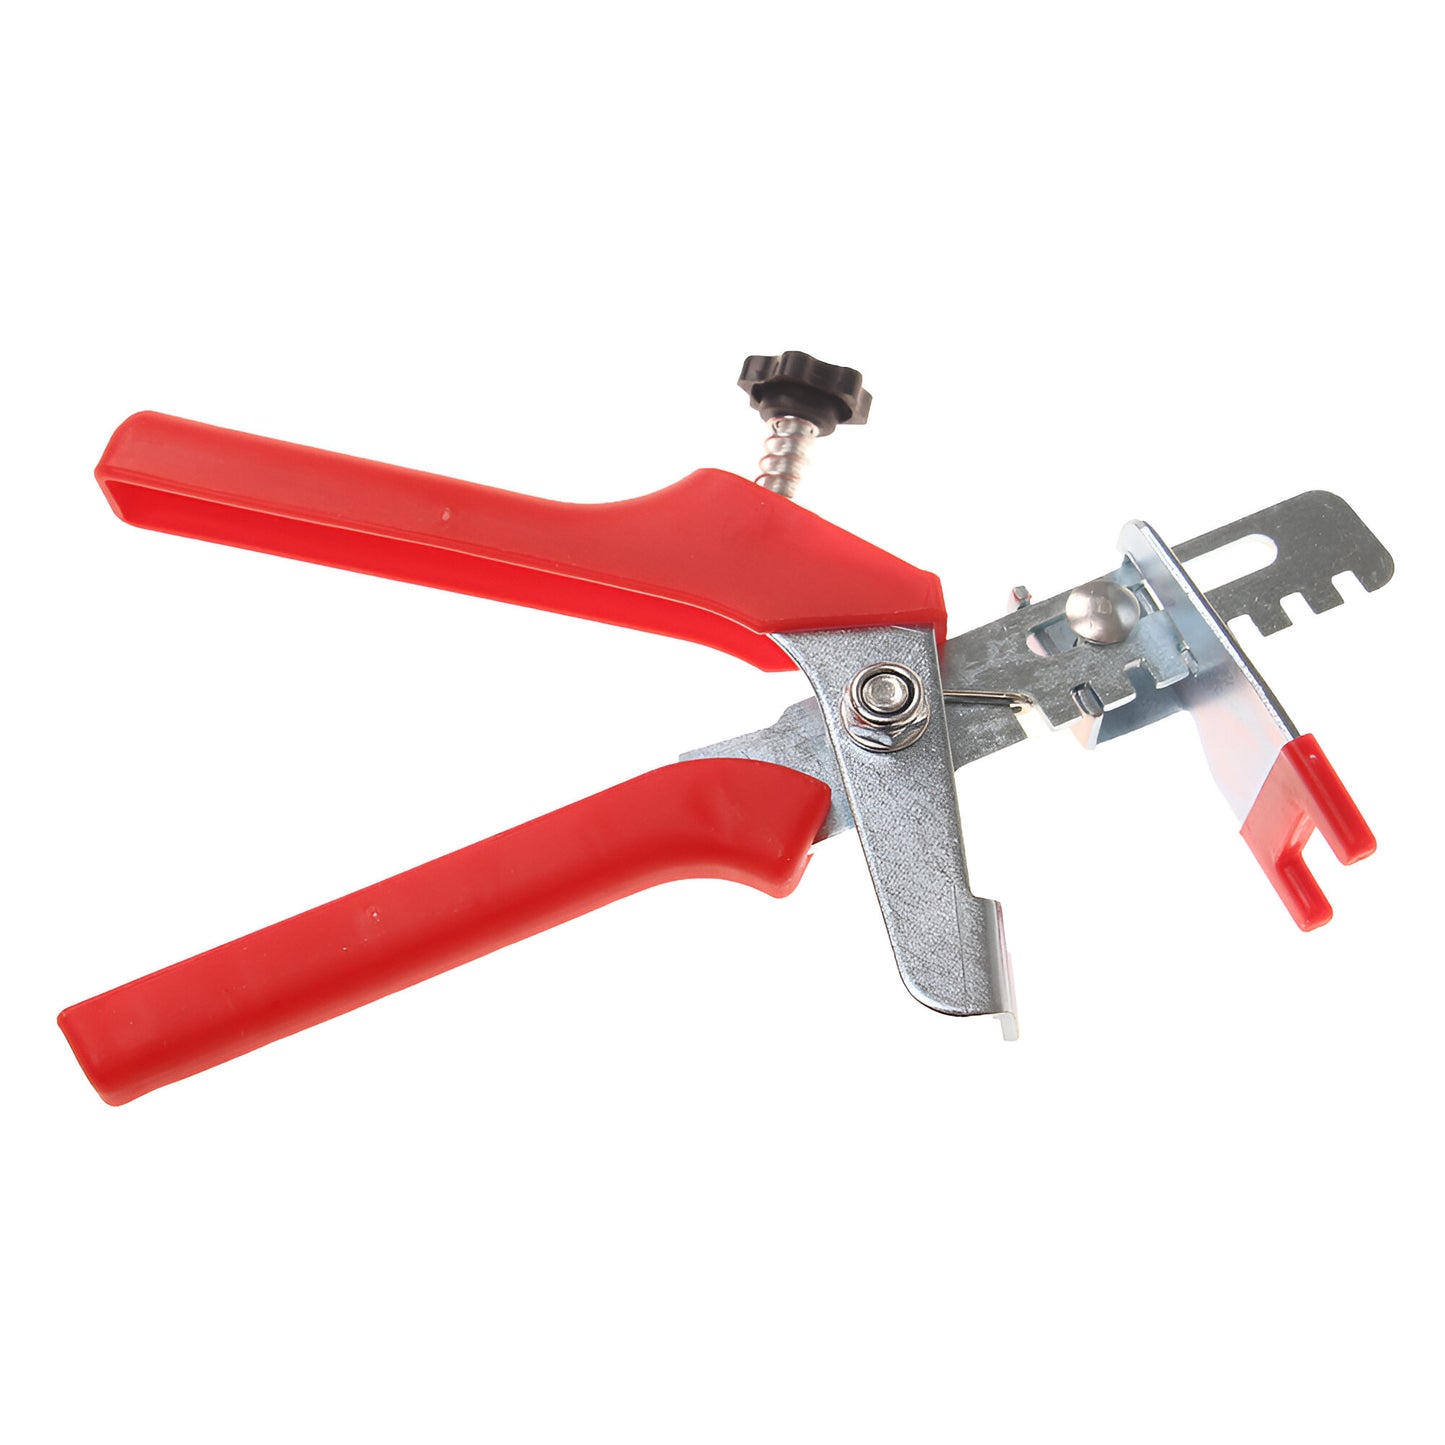 Pliers Stone Tile Leveling System Installation Leveler Spacer ~3590